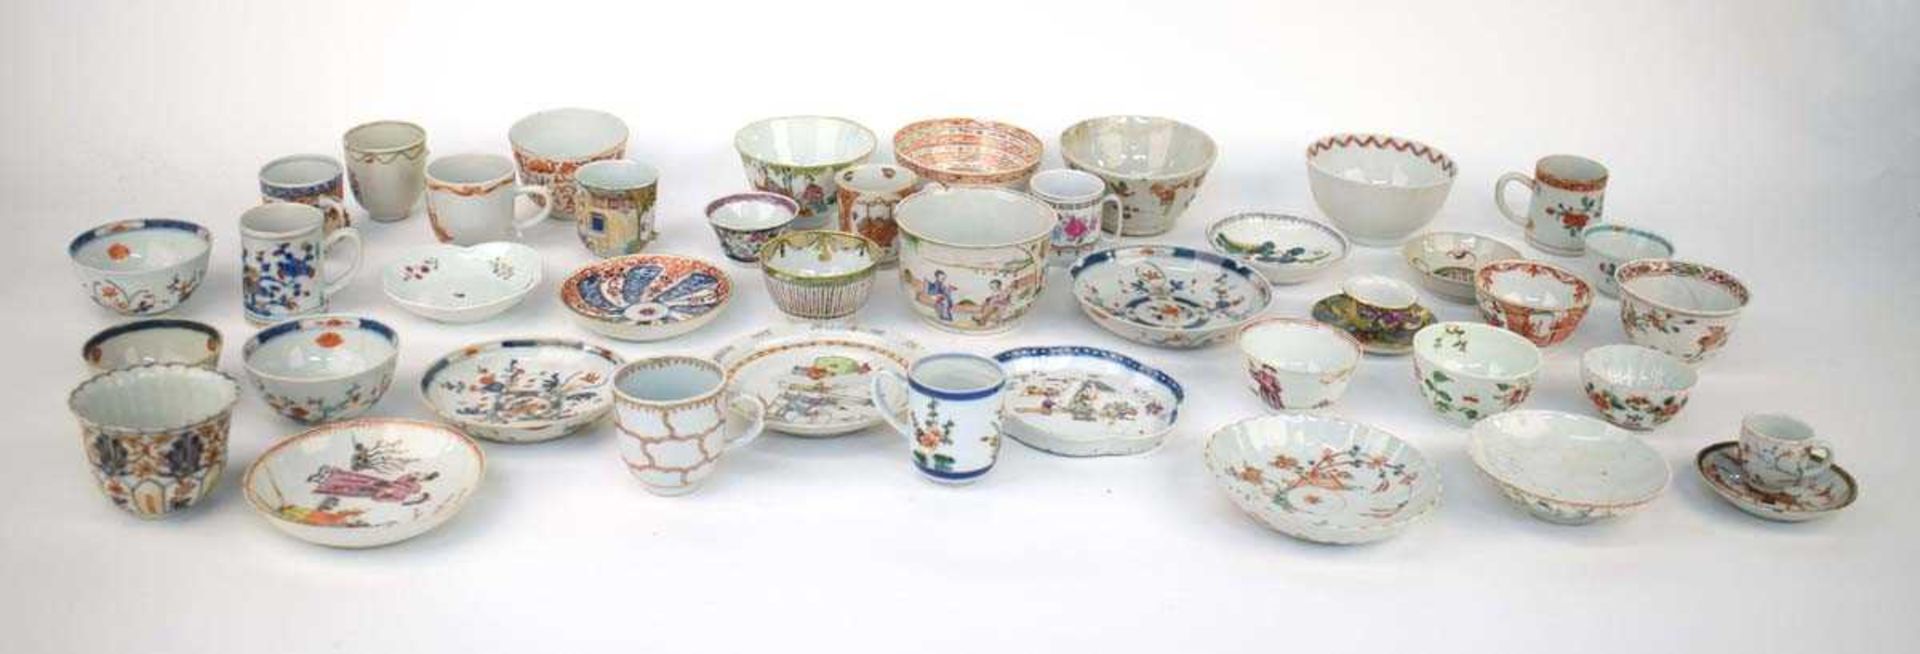 A large quantity of Chinese and other enamel and imari decorated tea bowls, tea cups, saucers and